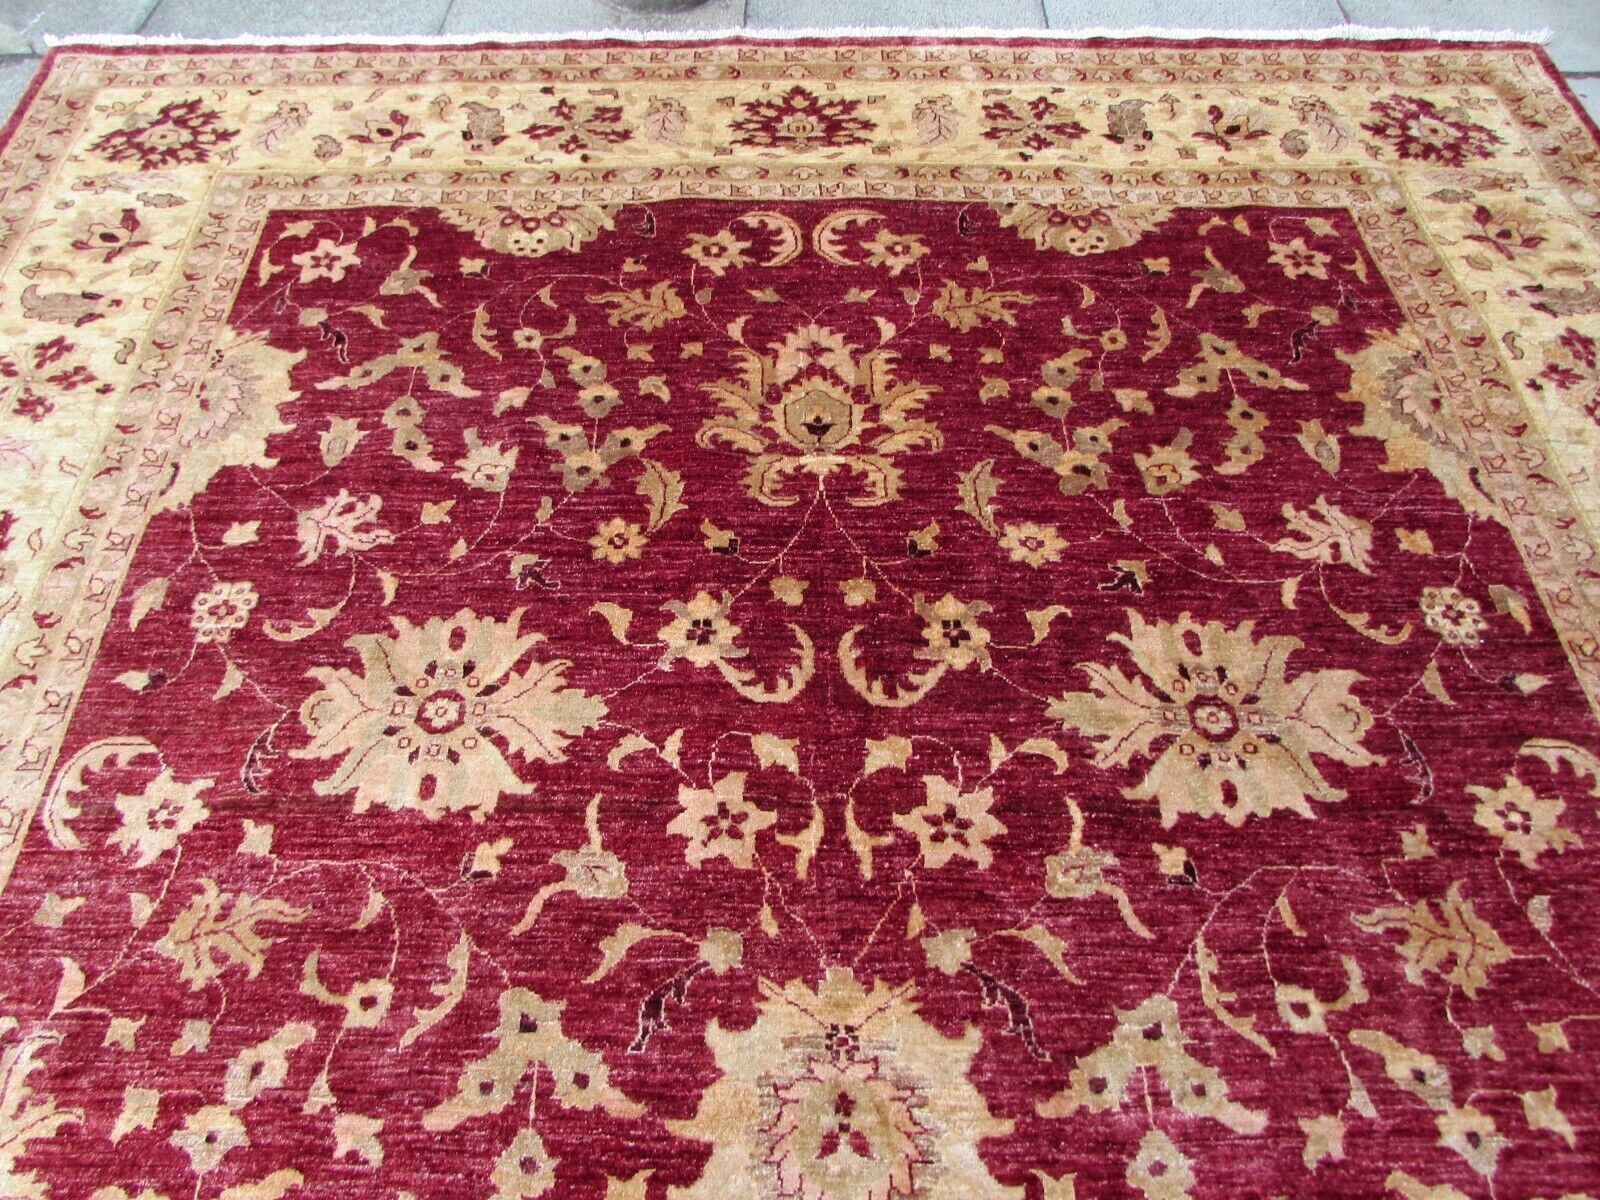 Close-up of a section of the rug, highlighting its overall quality and beauty.